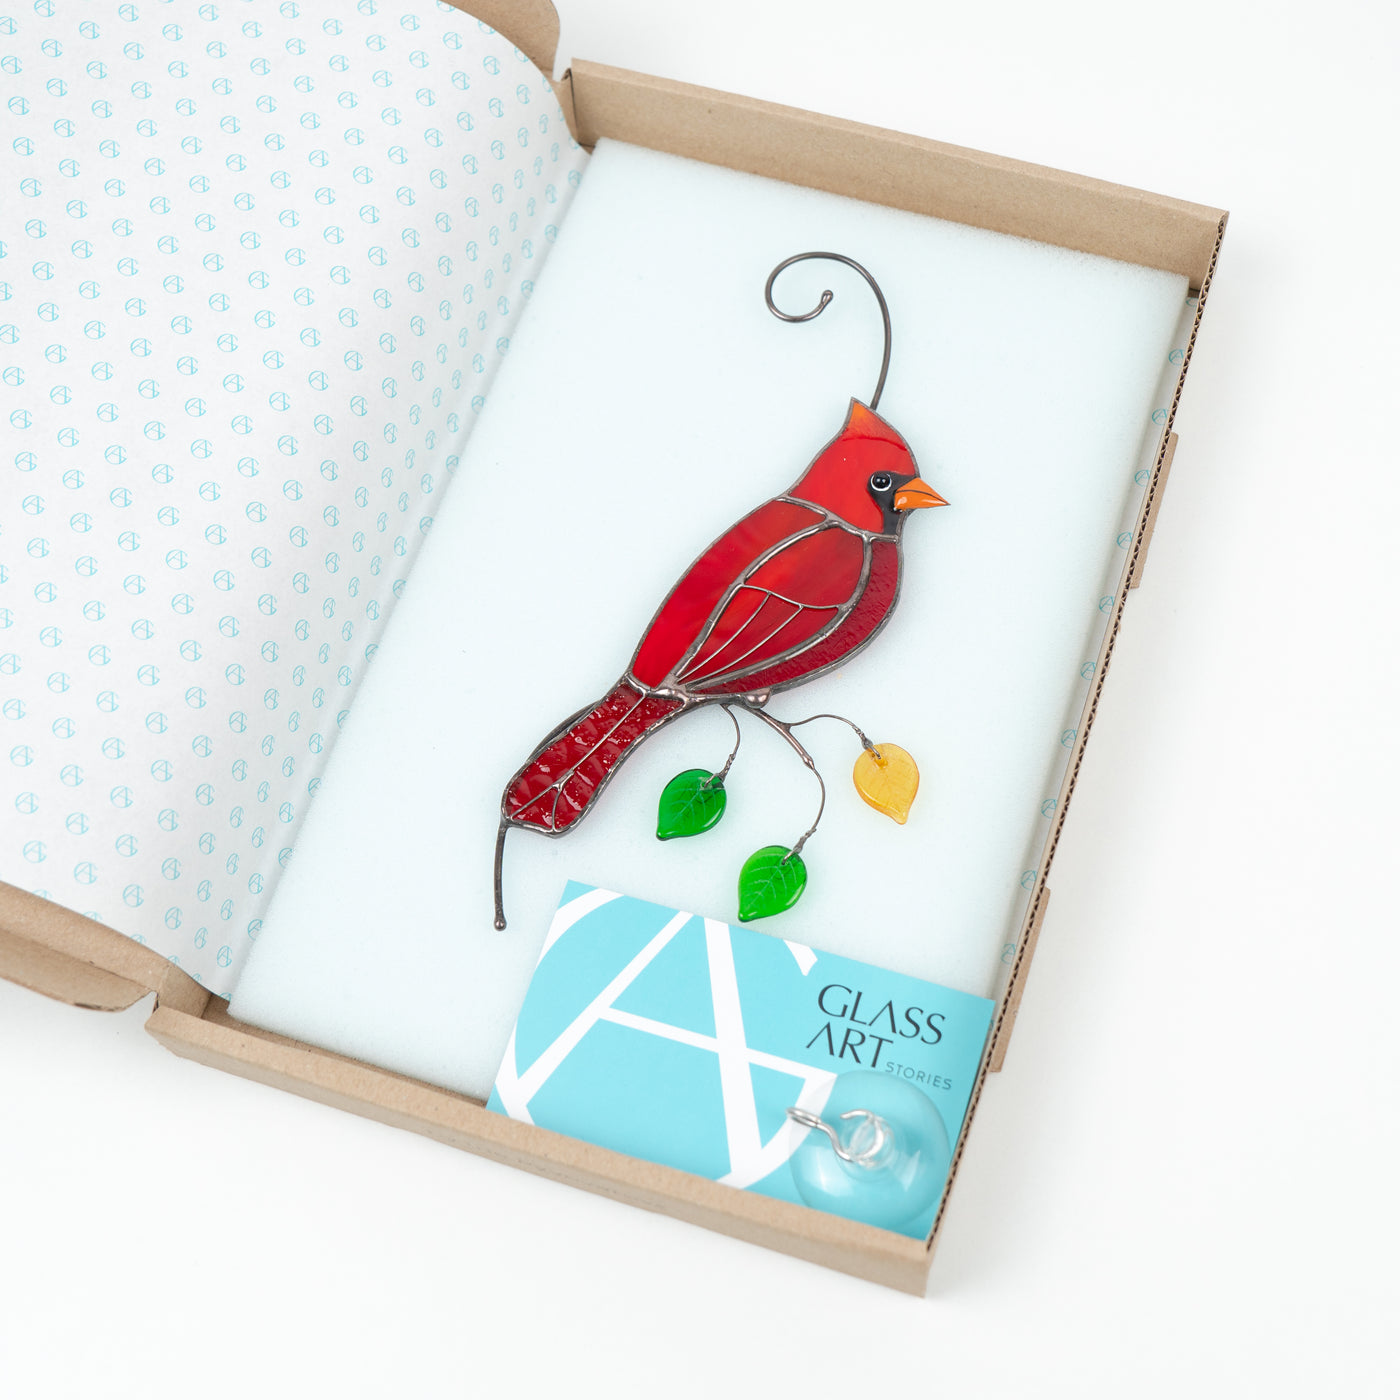 Stained glass red cardinal on the branch with leaves window hanging in a brand box